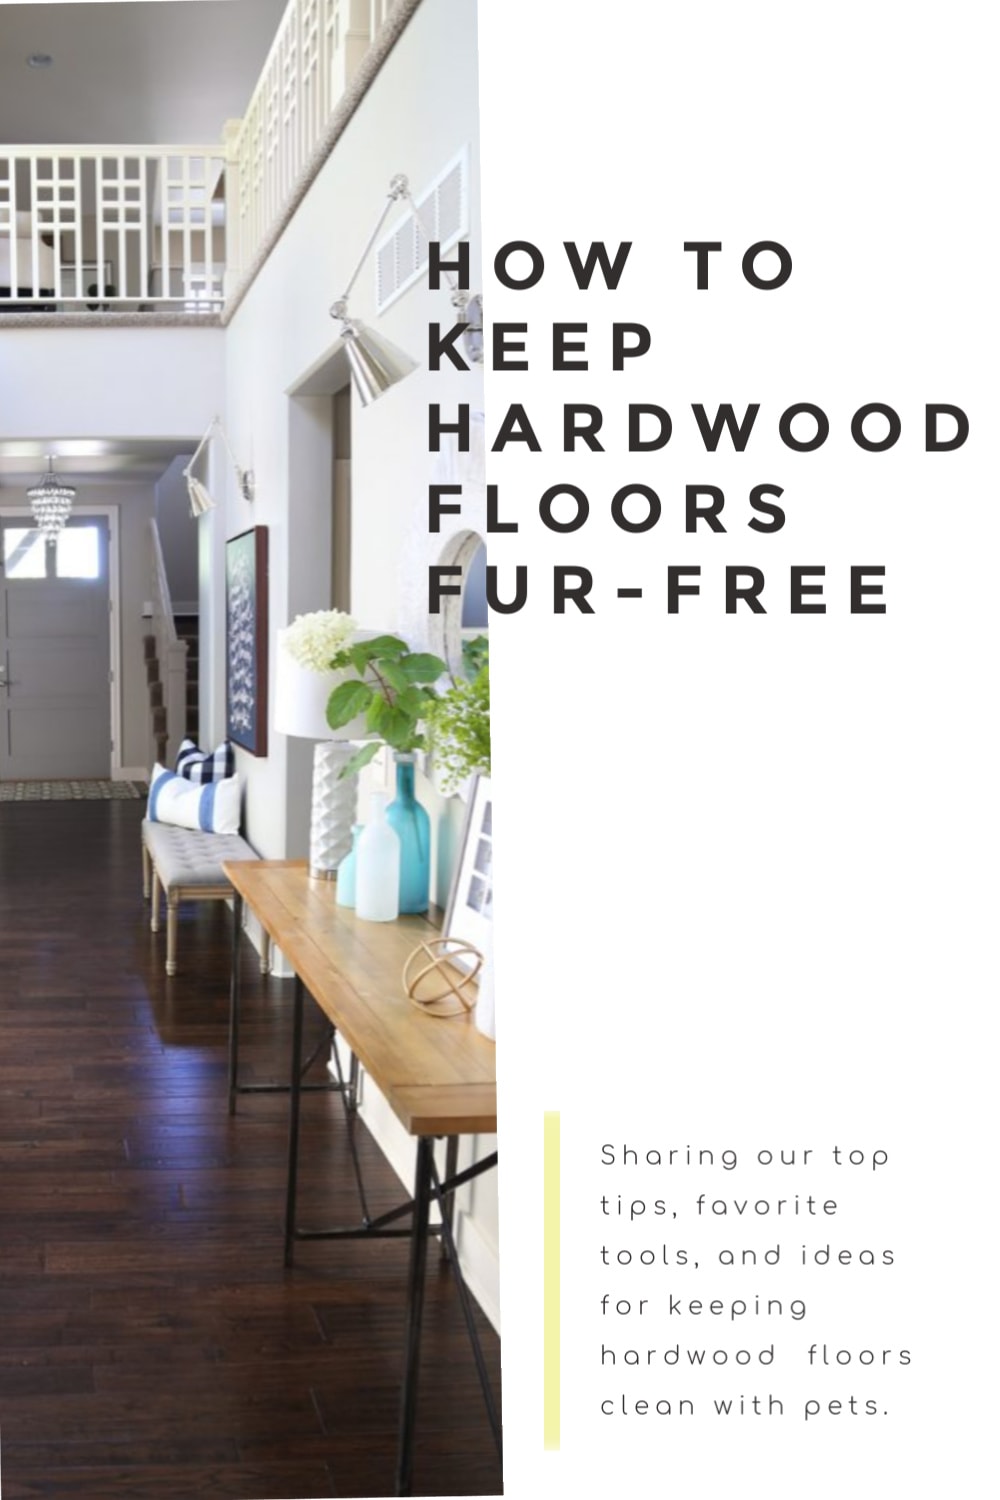 How To Have Fur Free Floors With Pets, Keeping Hardwood Floors Clean